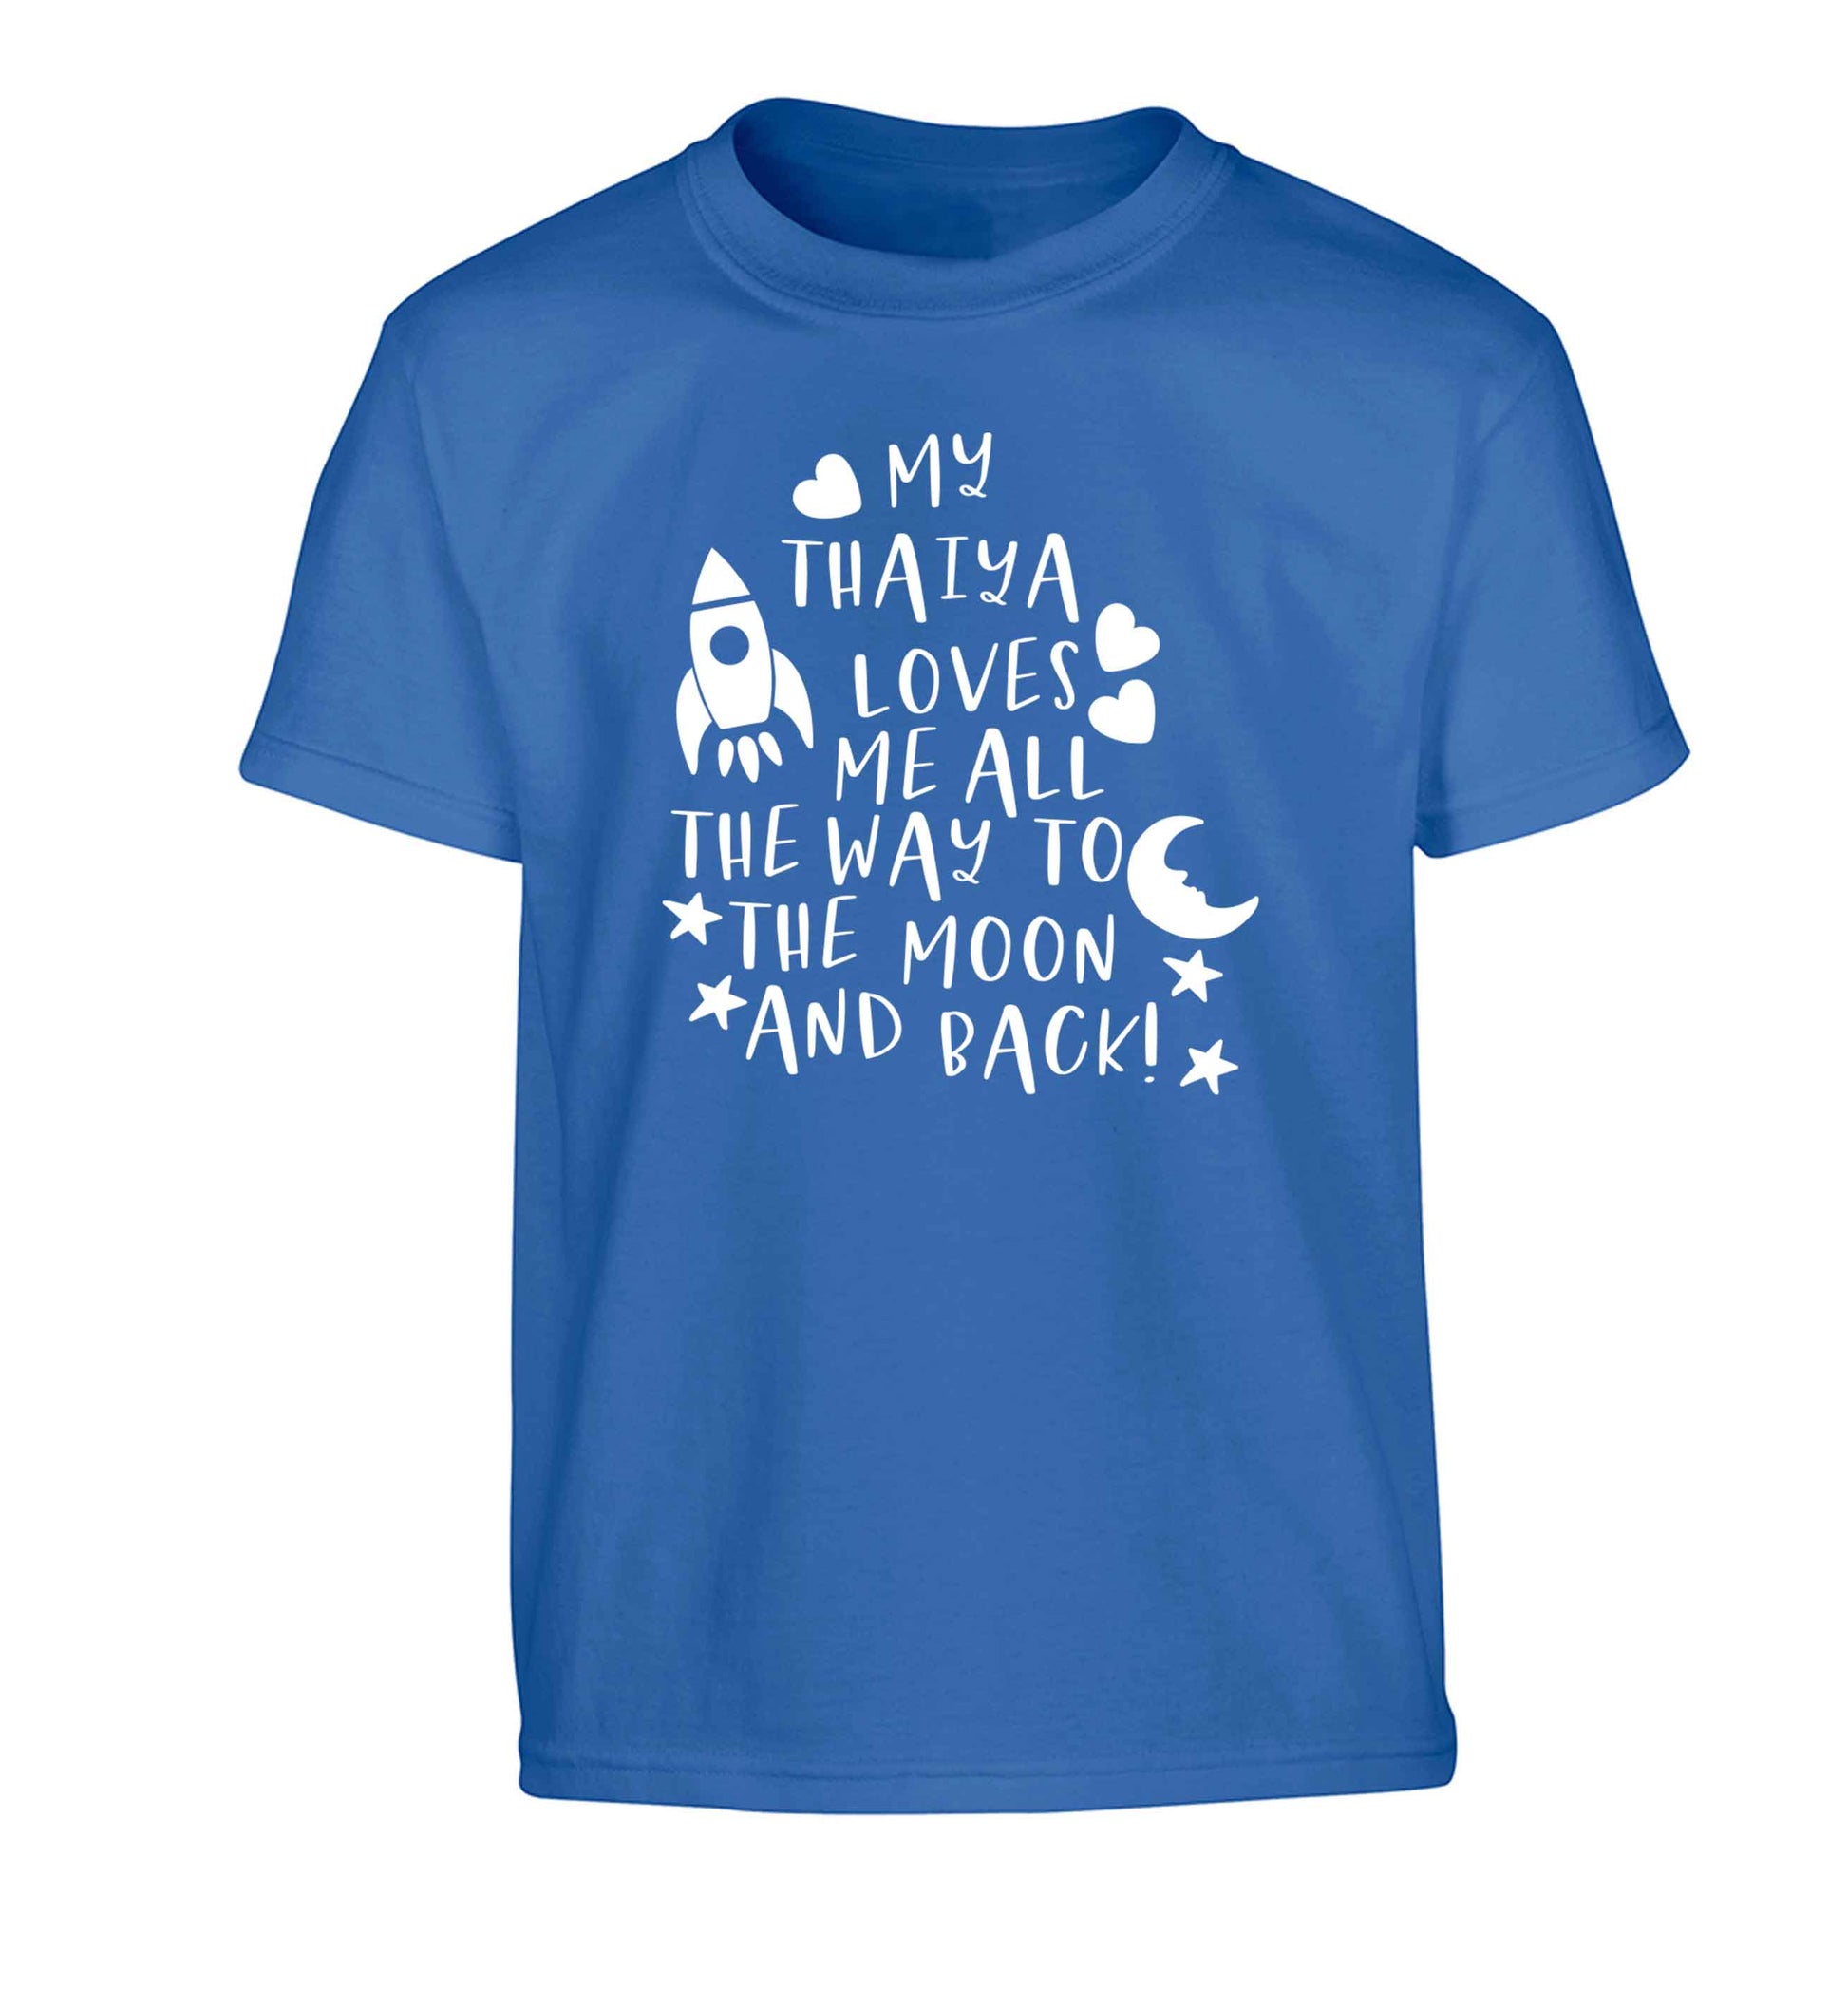 My thaiya loves me all the way to the moon and back Children's blue Tshirt 12-13 Years